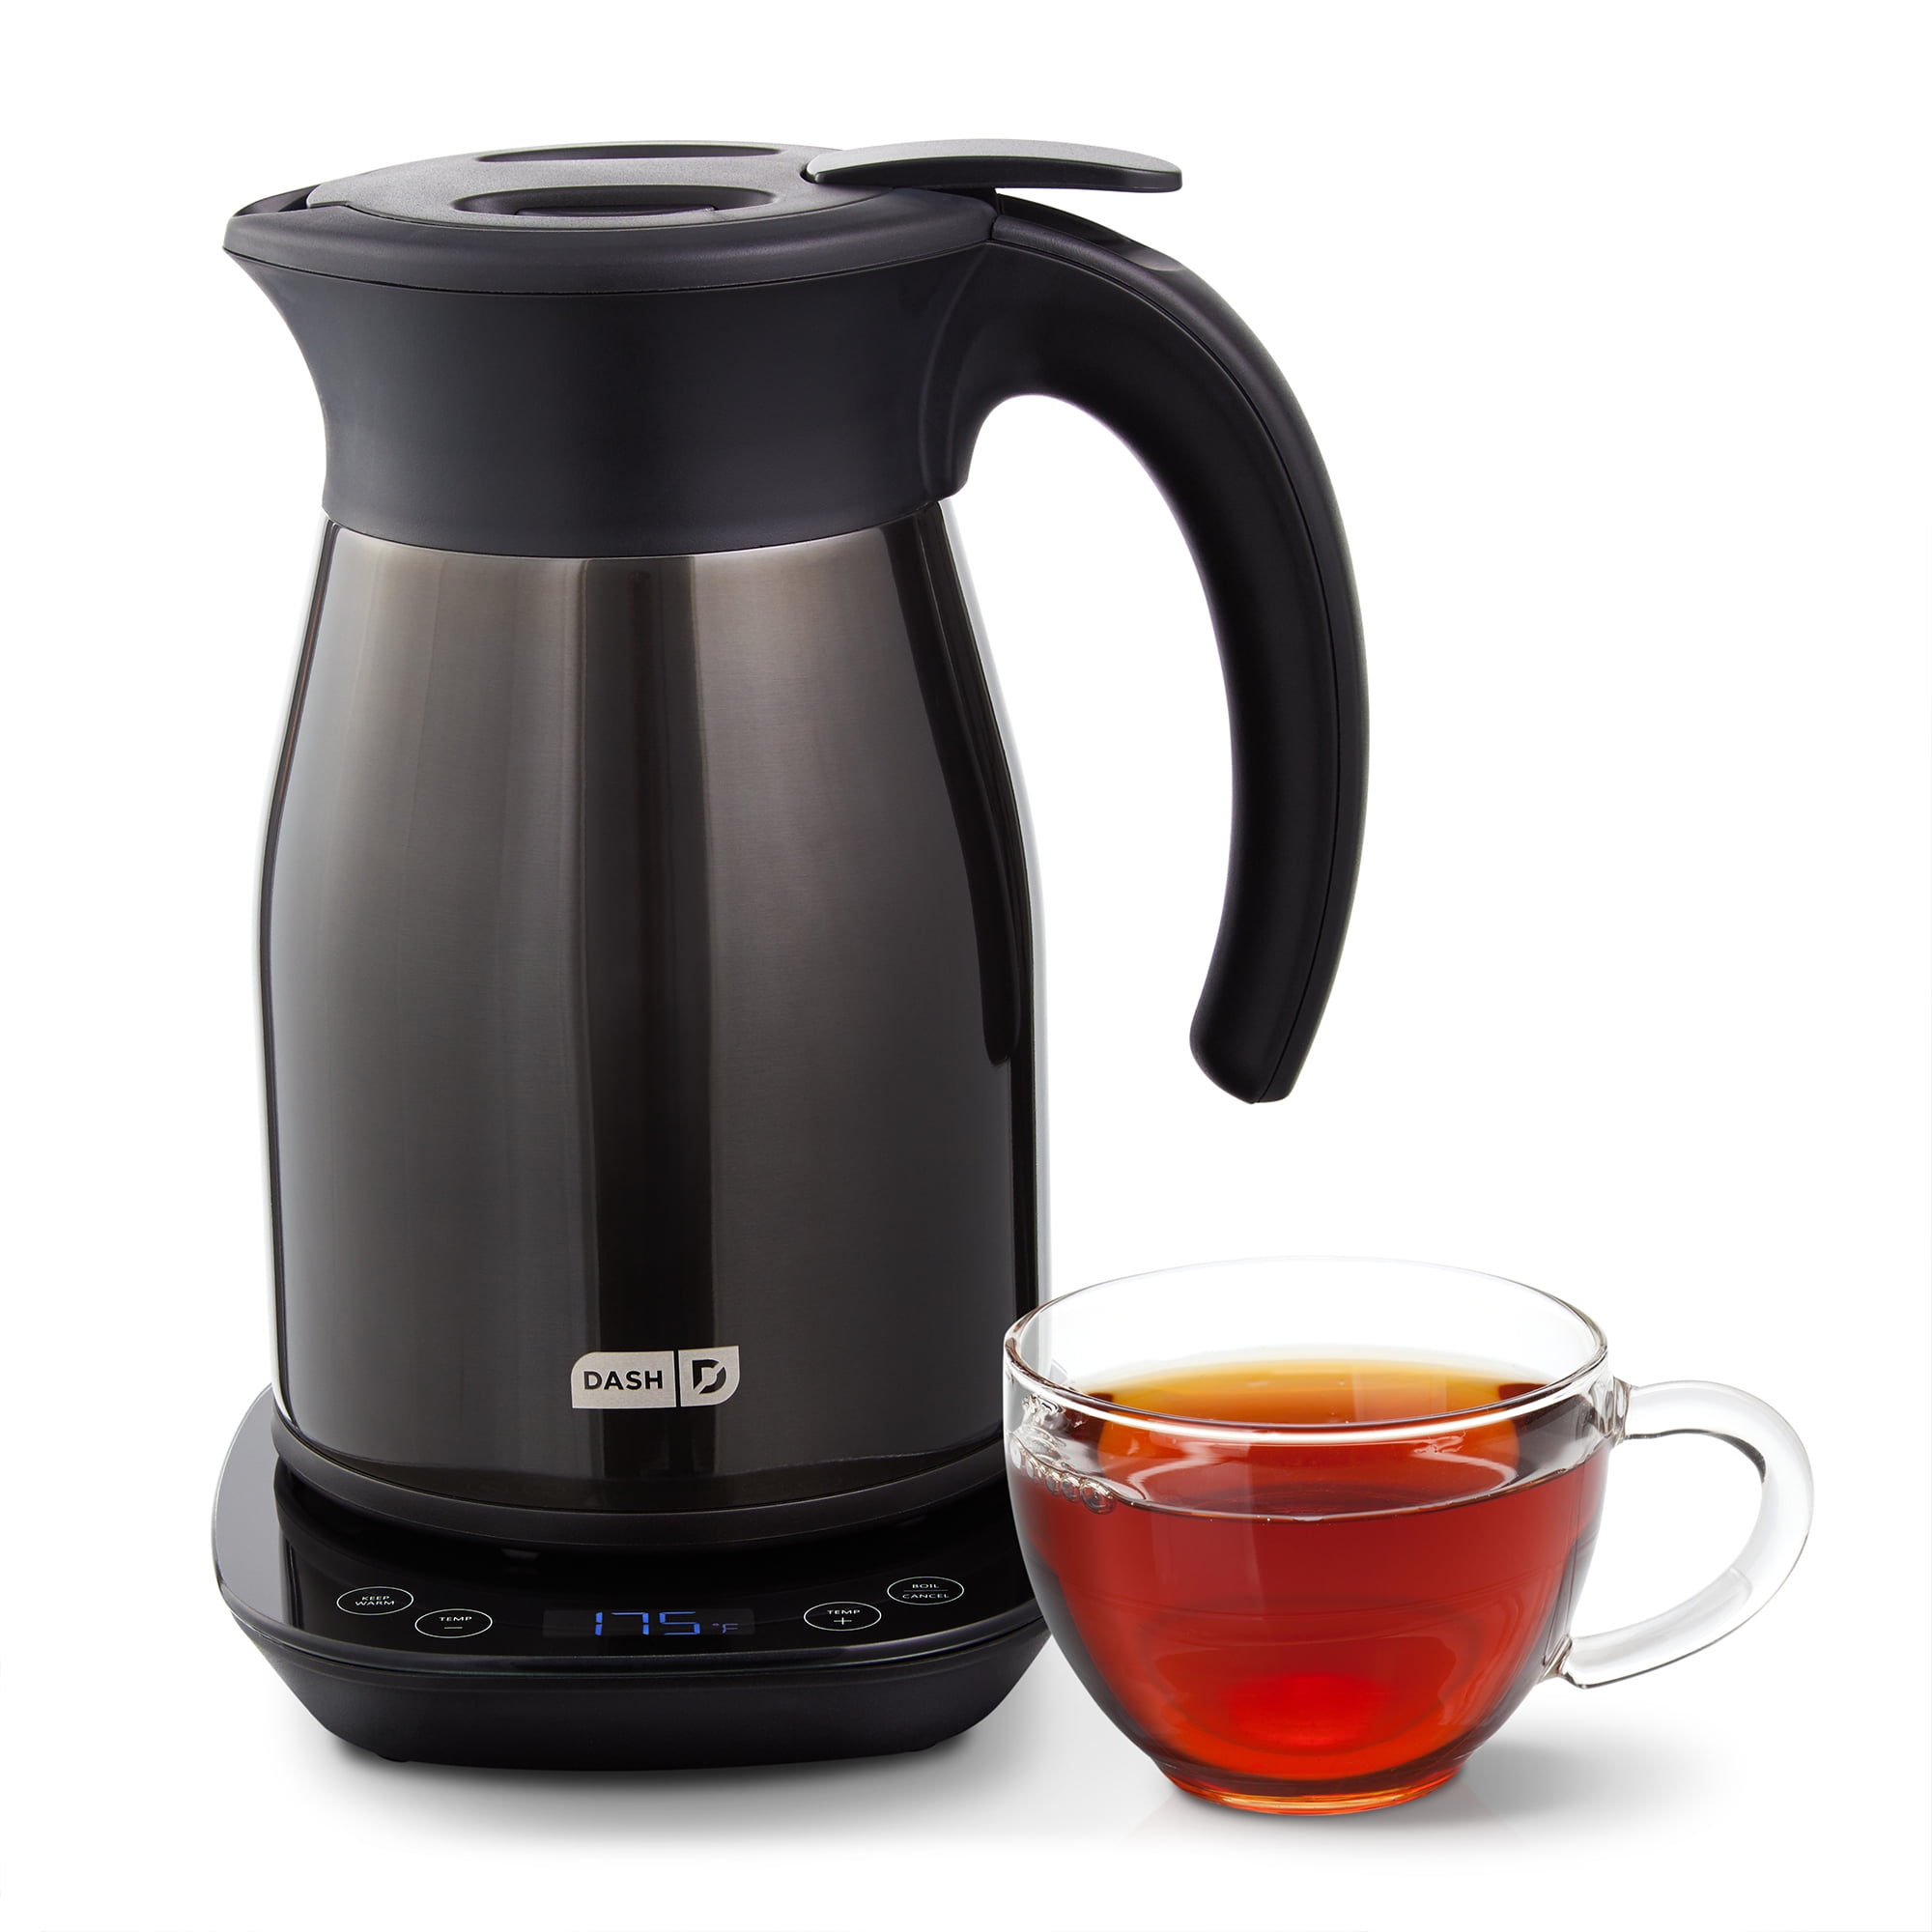 Dash Black Insulated Stainless Steel Electric Kettle - World Market